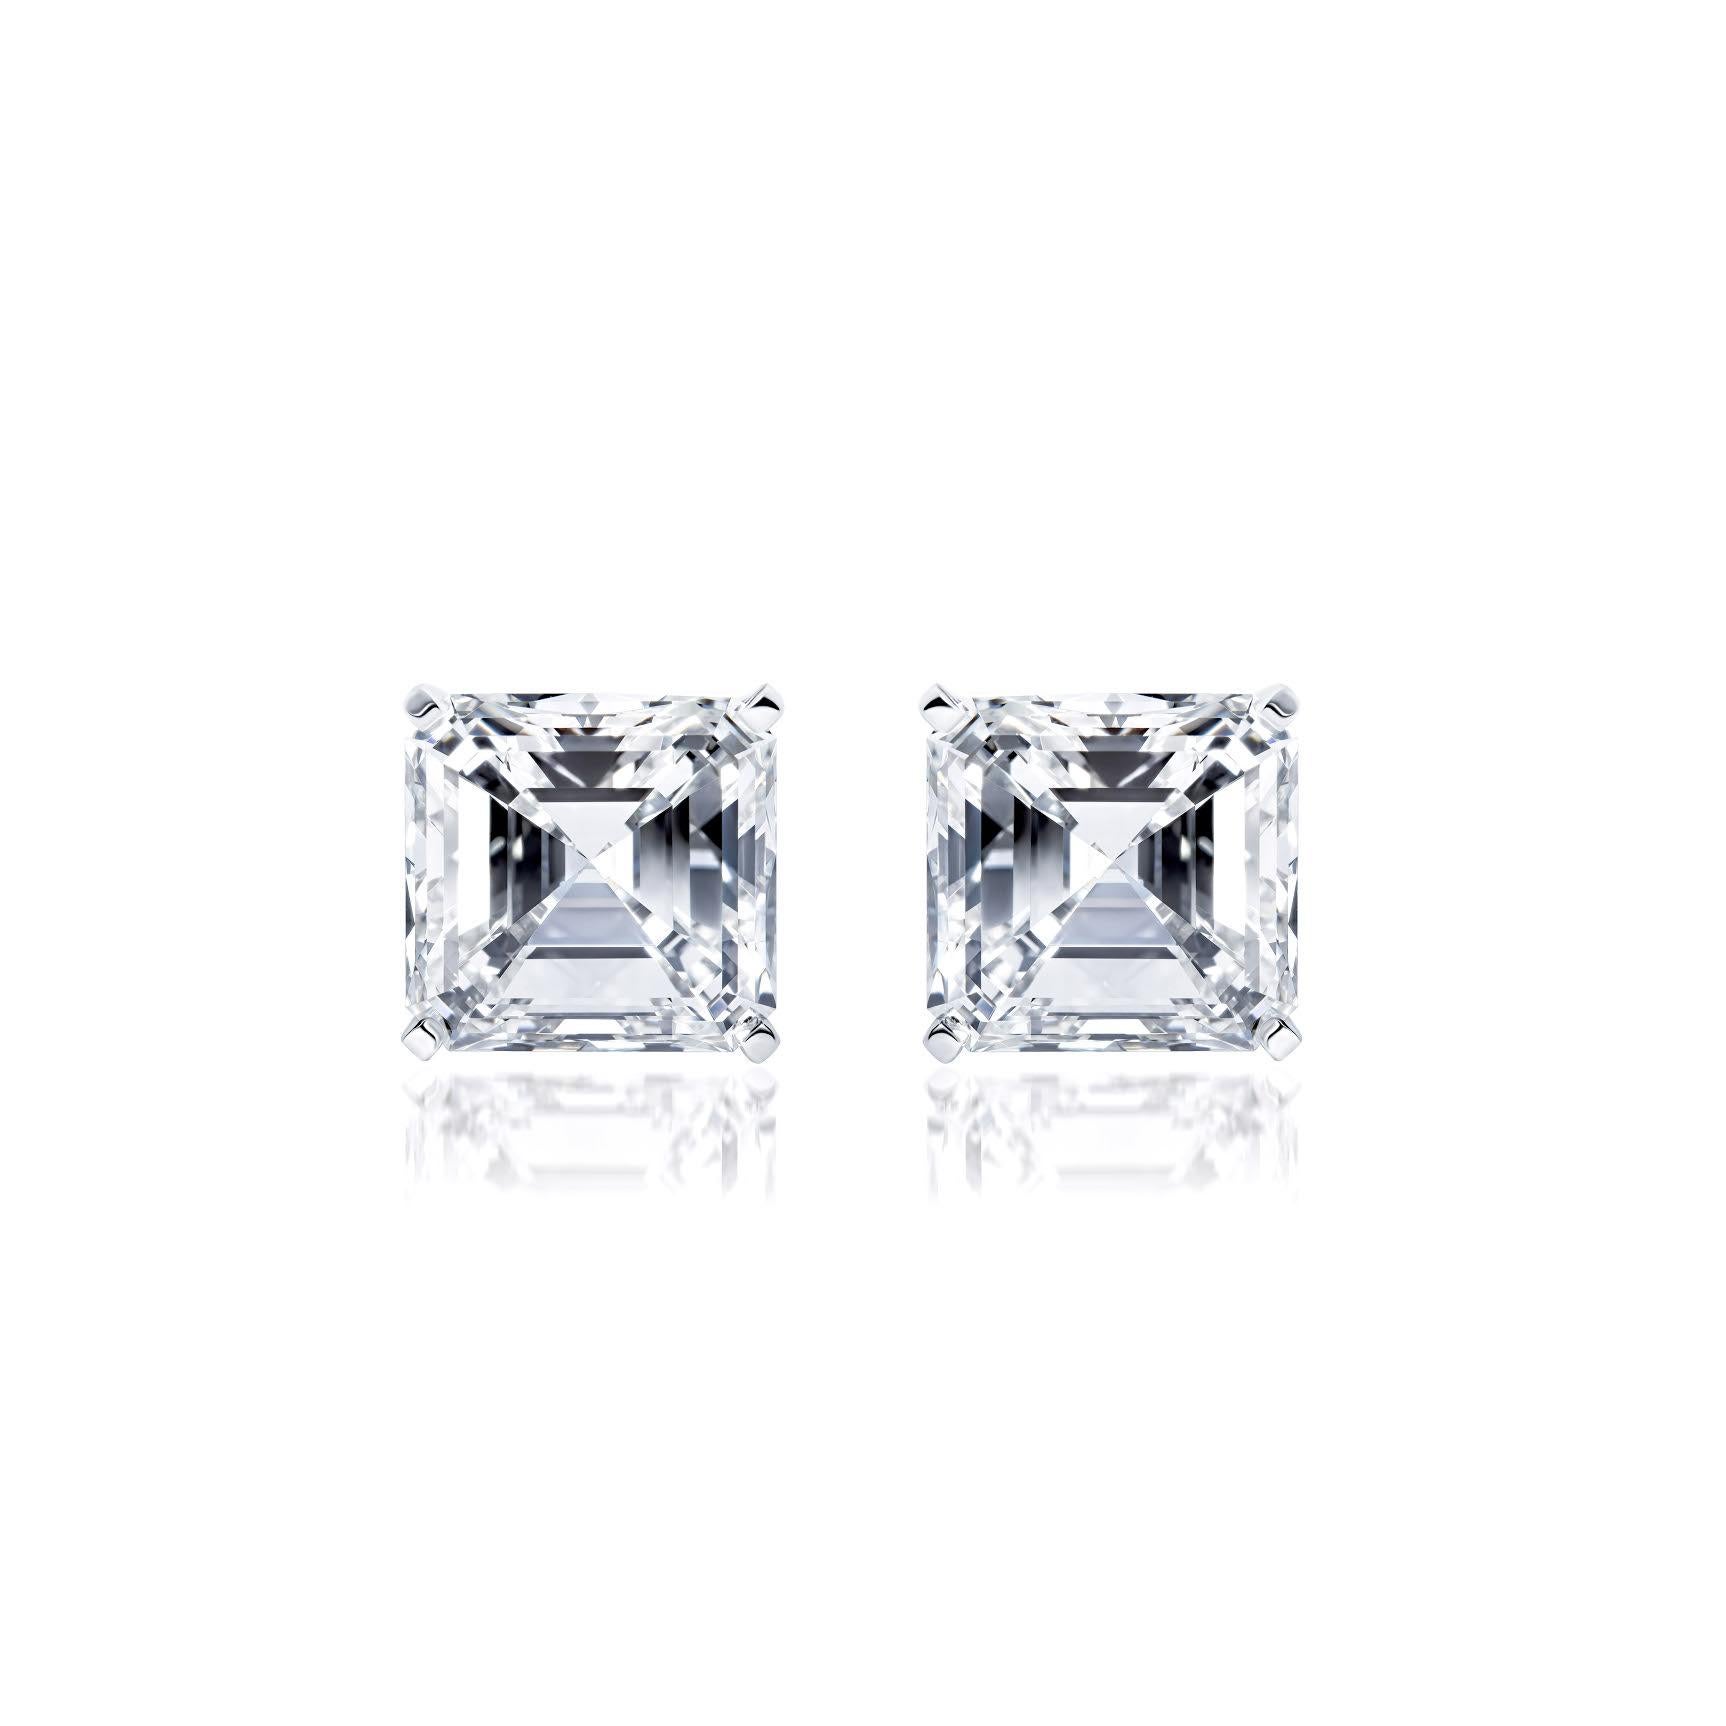 Sophisticated elegance with an edge.
These extraordinary gems weight in at over 5 1/2 carats each! for a total combined  carat weight of 11.53  
Asccher cut diamonds of this quality are rare, a perfectly matched pair of this size is truly a